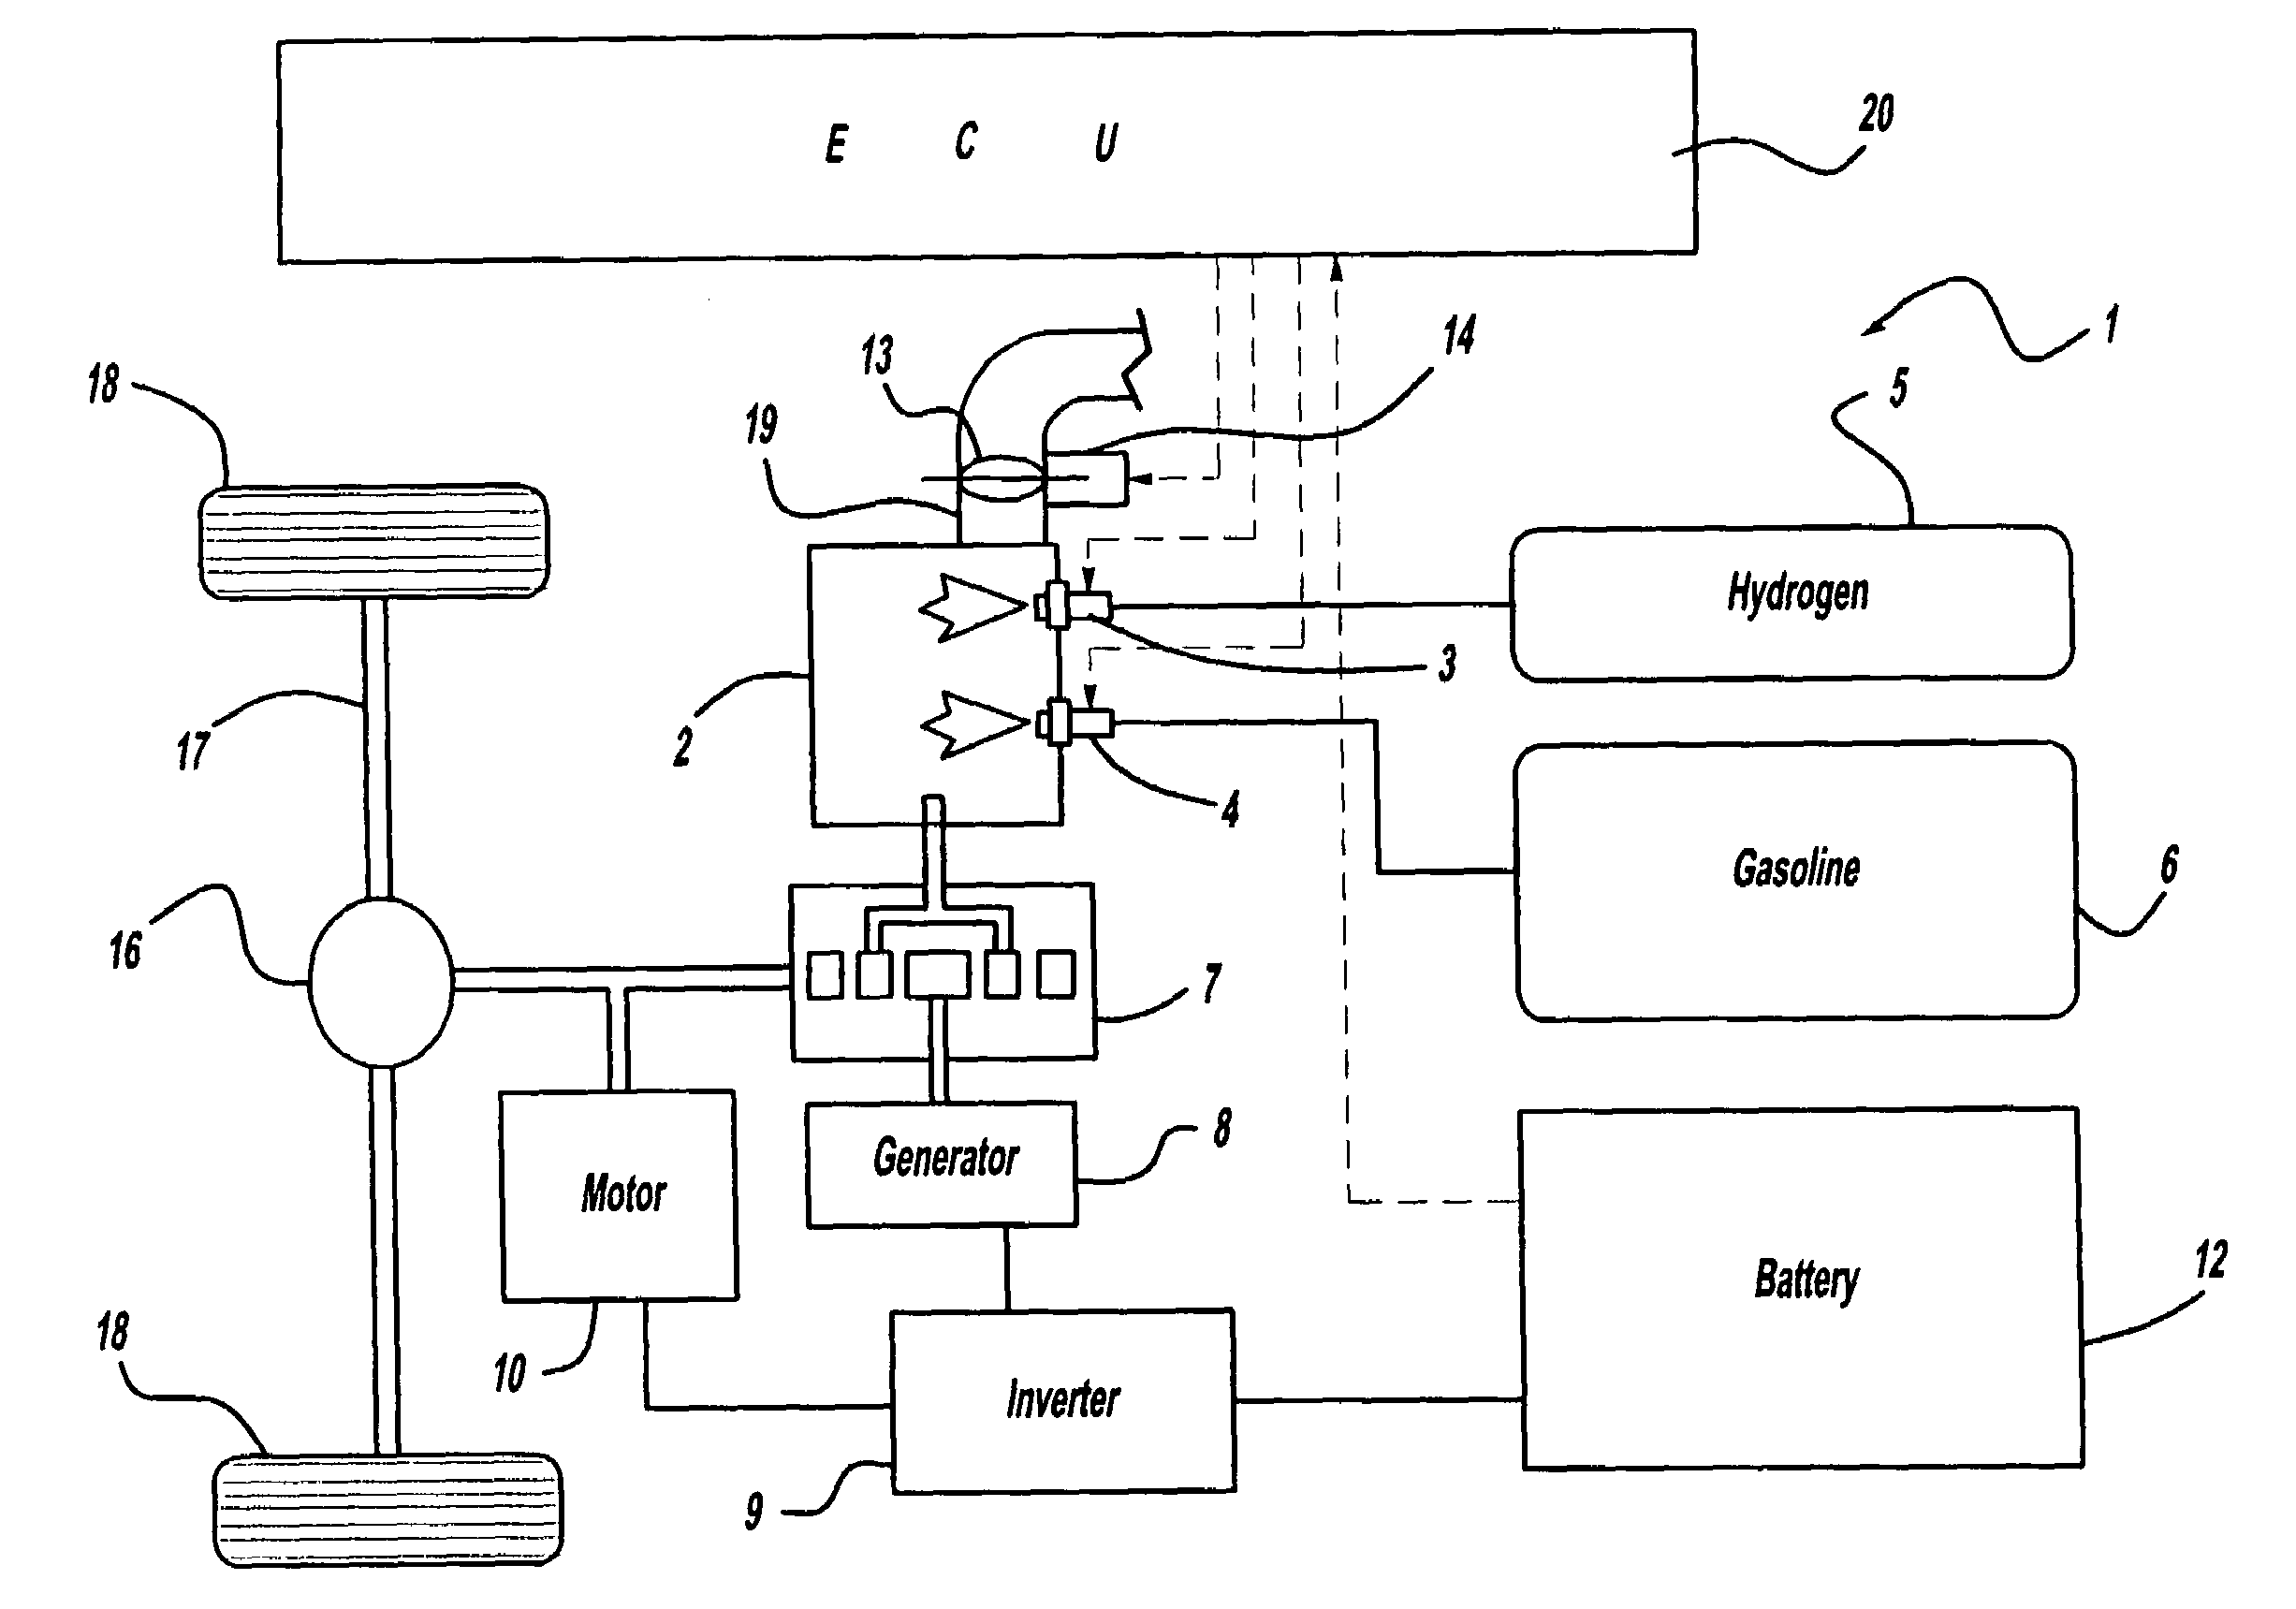 Fuel switching for dual fuel engine